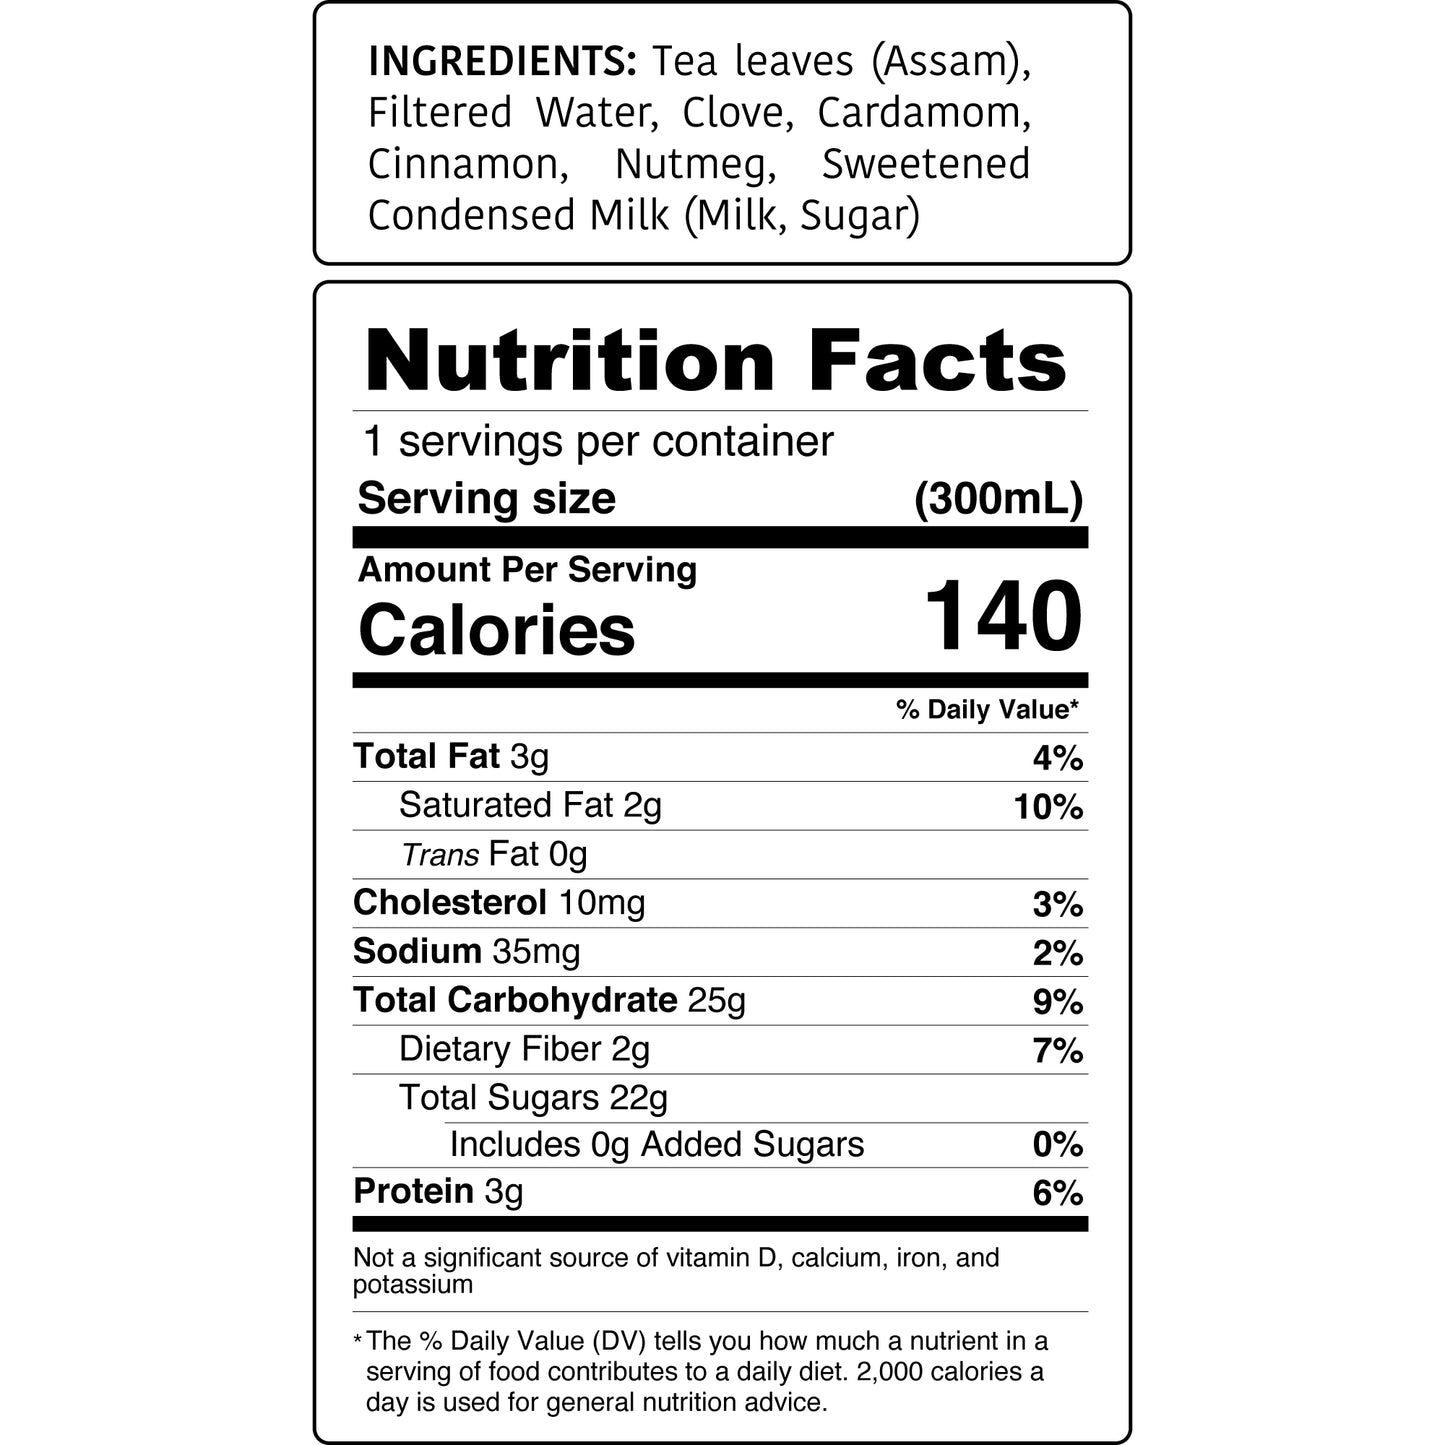 Kimbala Chai Assamica nutrition label for a 10.2oz bottle